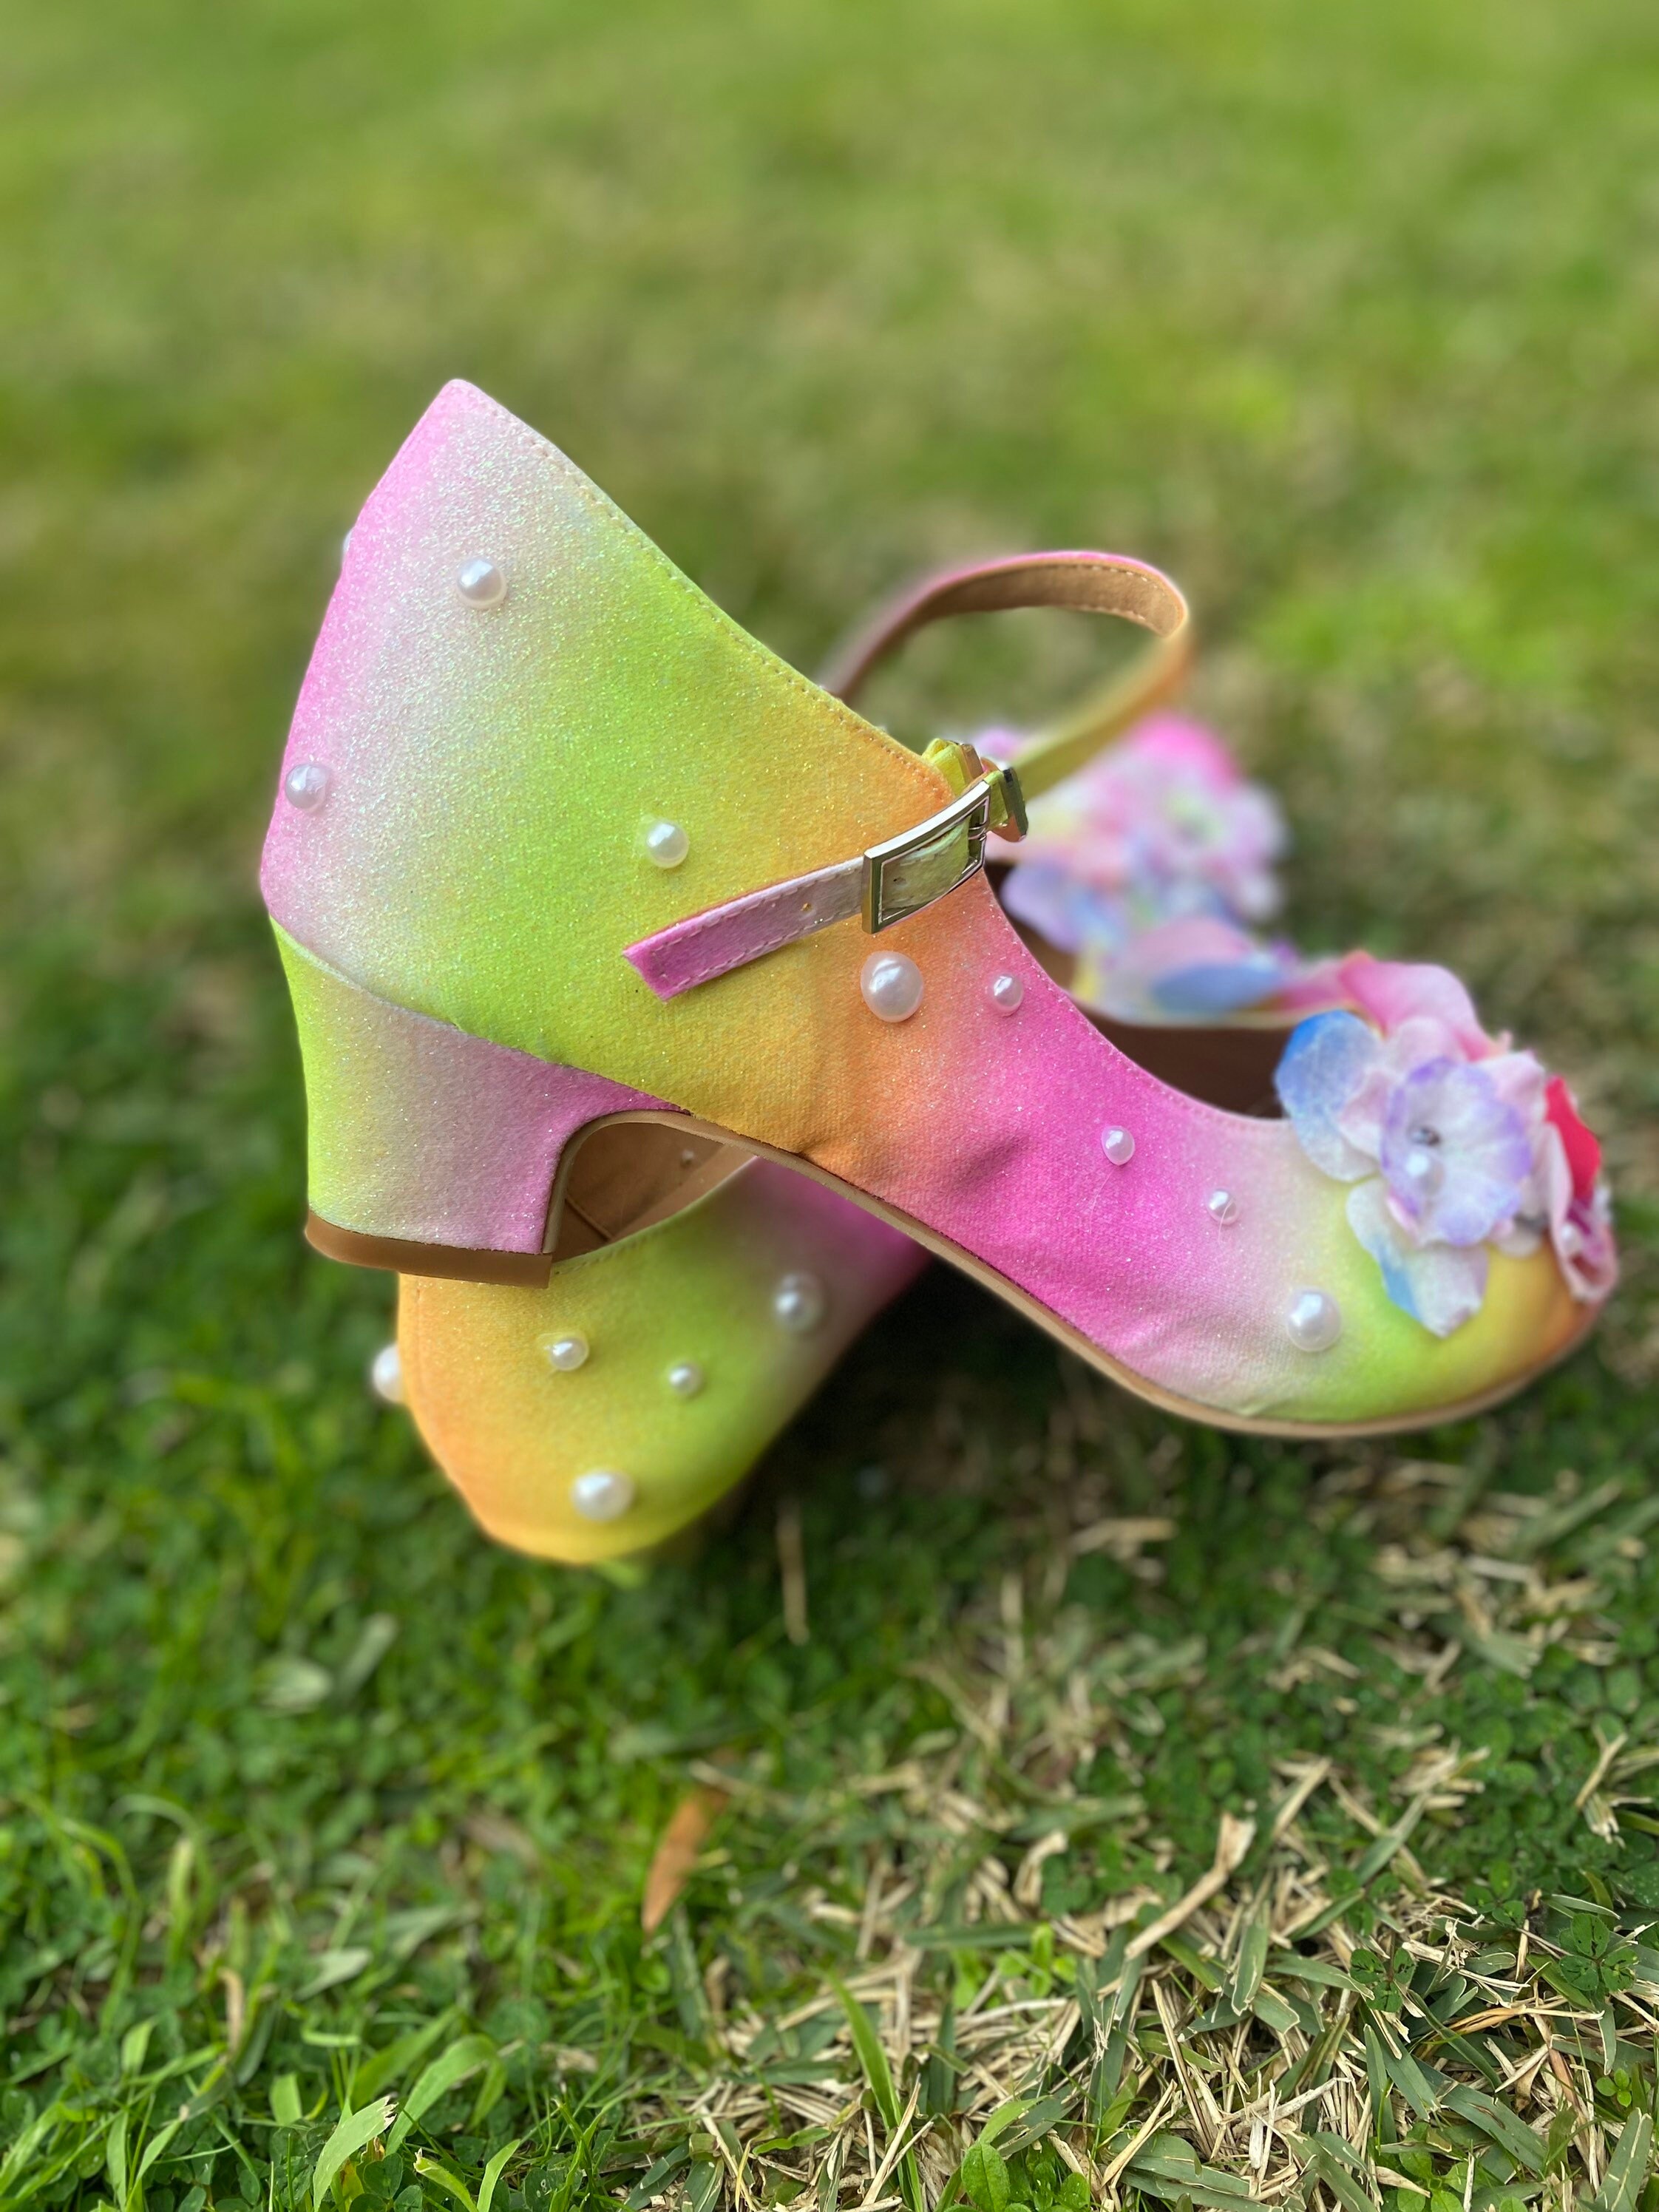 Pin by satrak on Туфля | Heels, Whimsical shoes, Fairy shoes